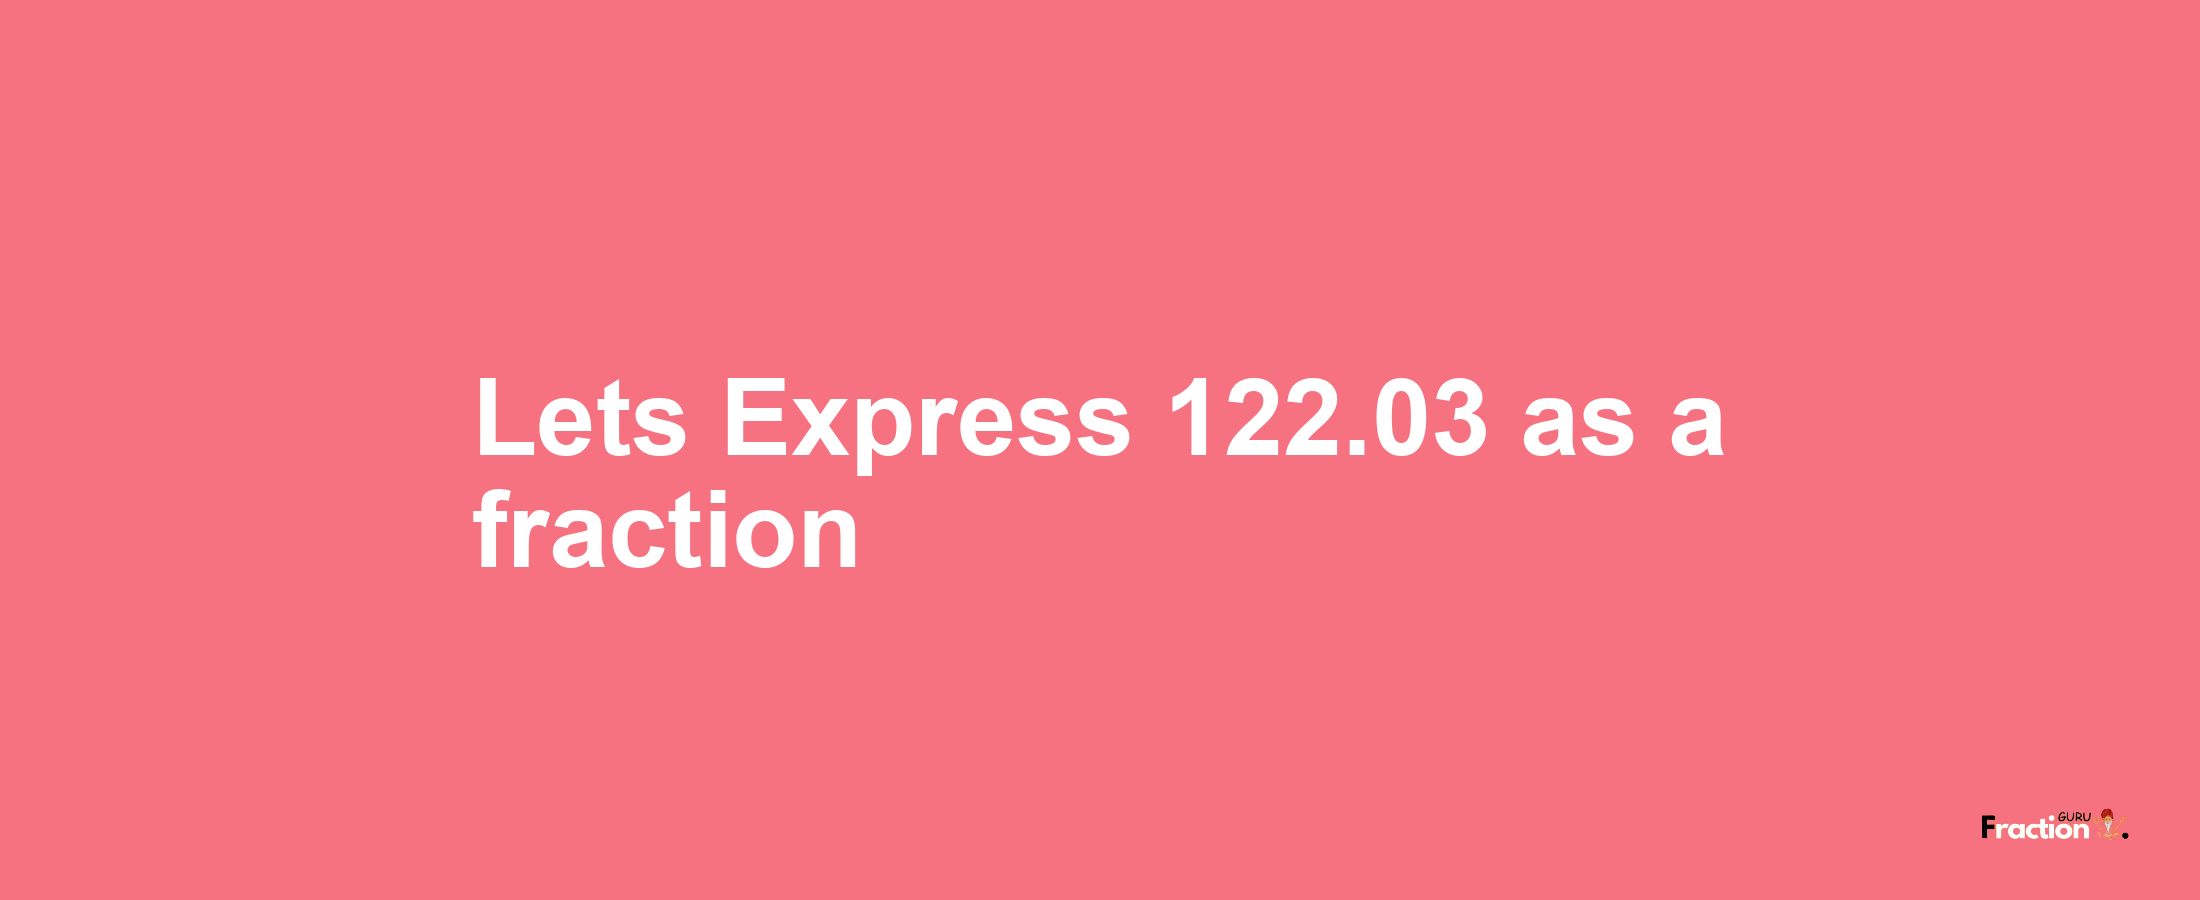 Lets Express 122.03 as afraction